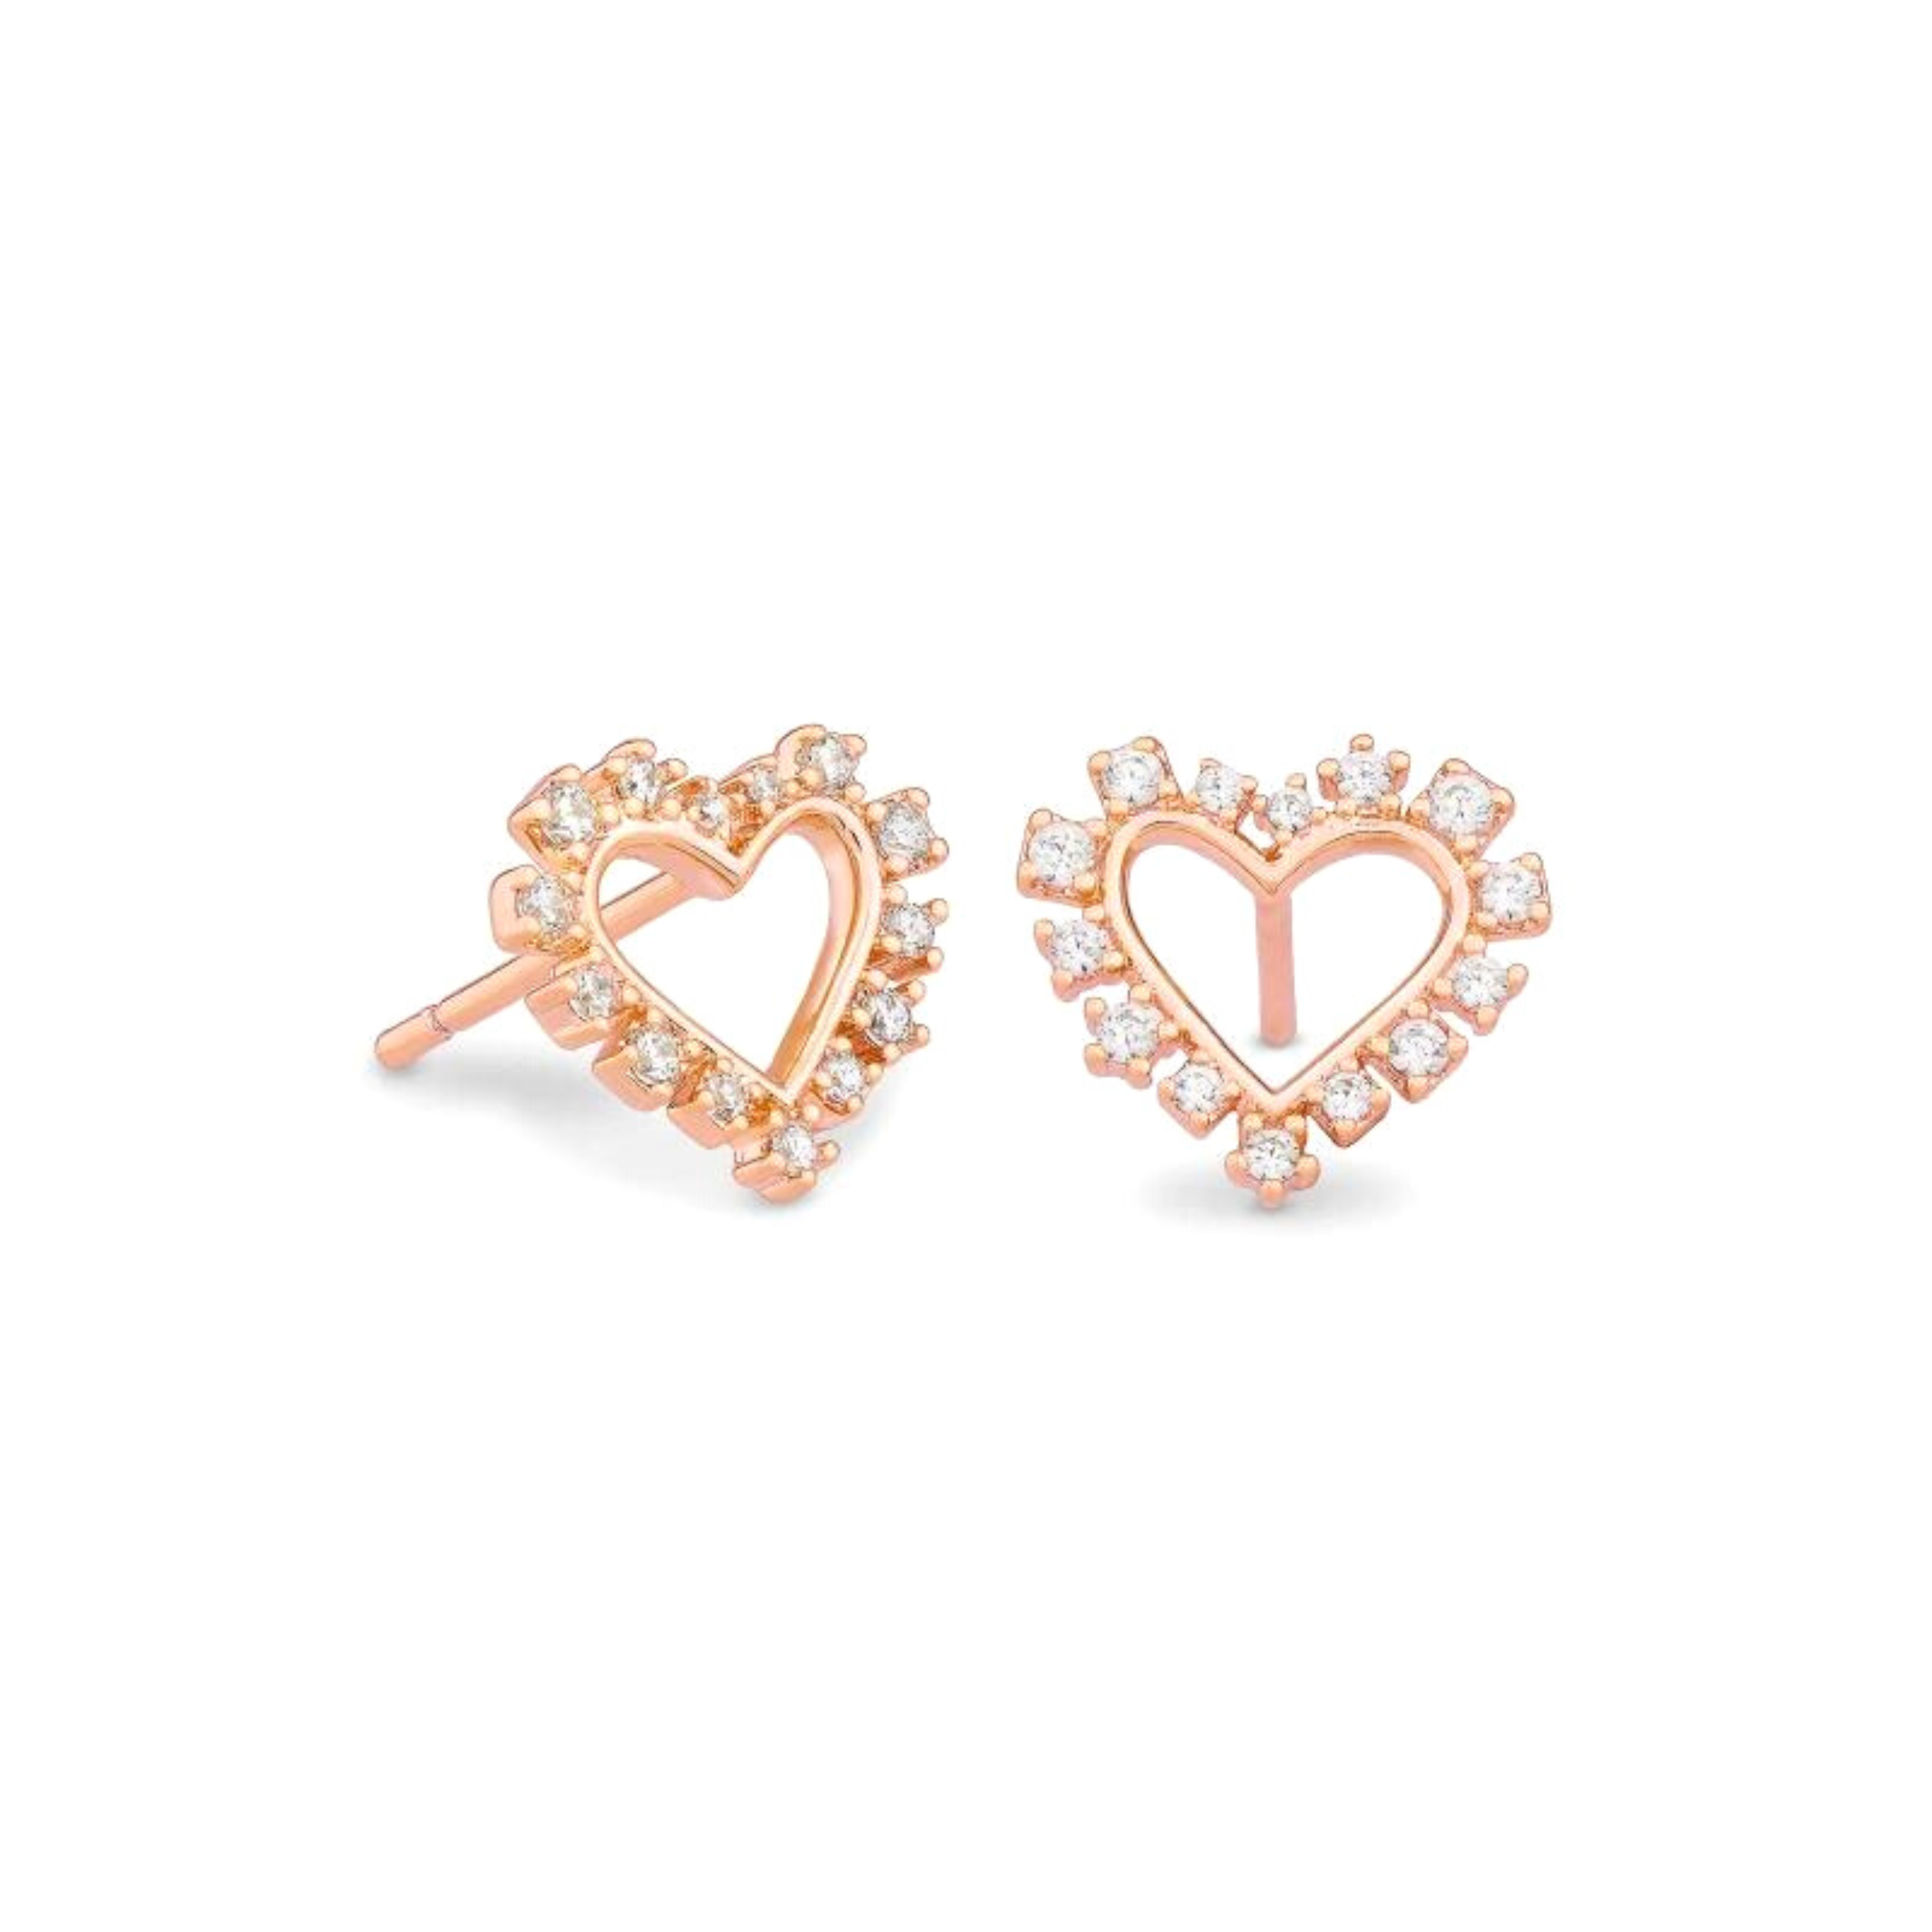 Kendra Scott | Ari Heart Rose Gold Stud Earrings in White Crystal - Giddy Up Glamour Boutique